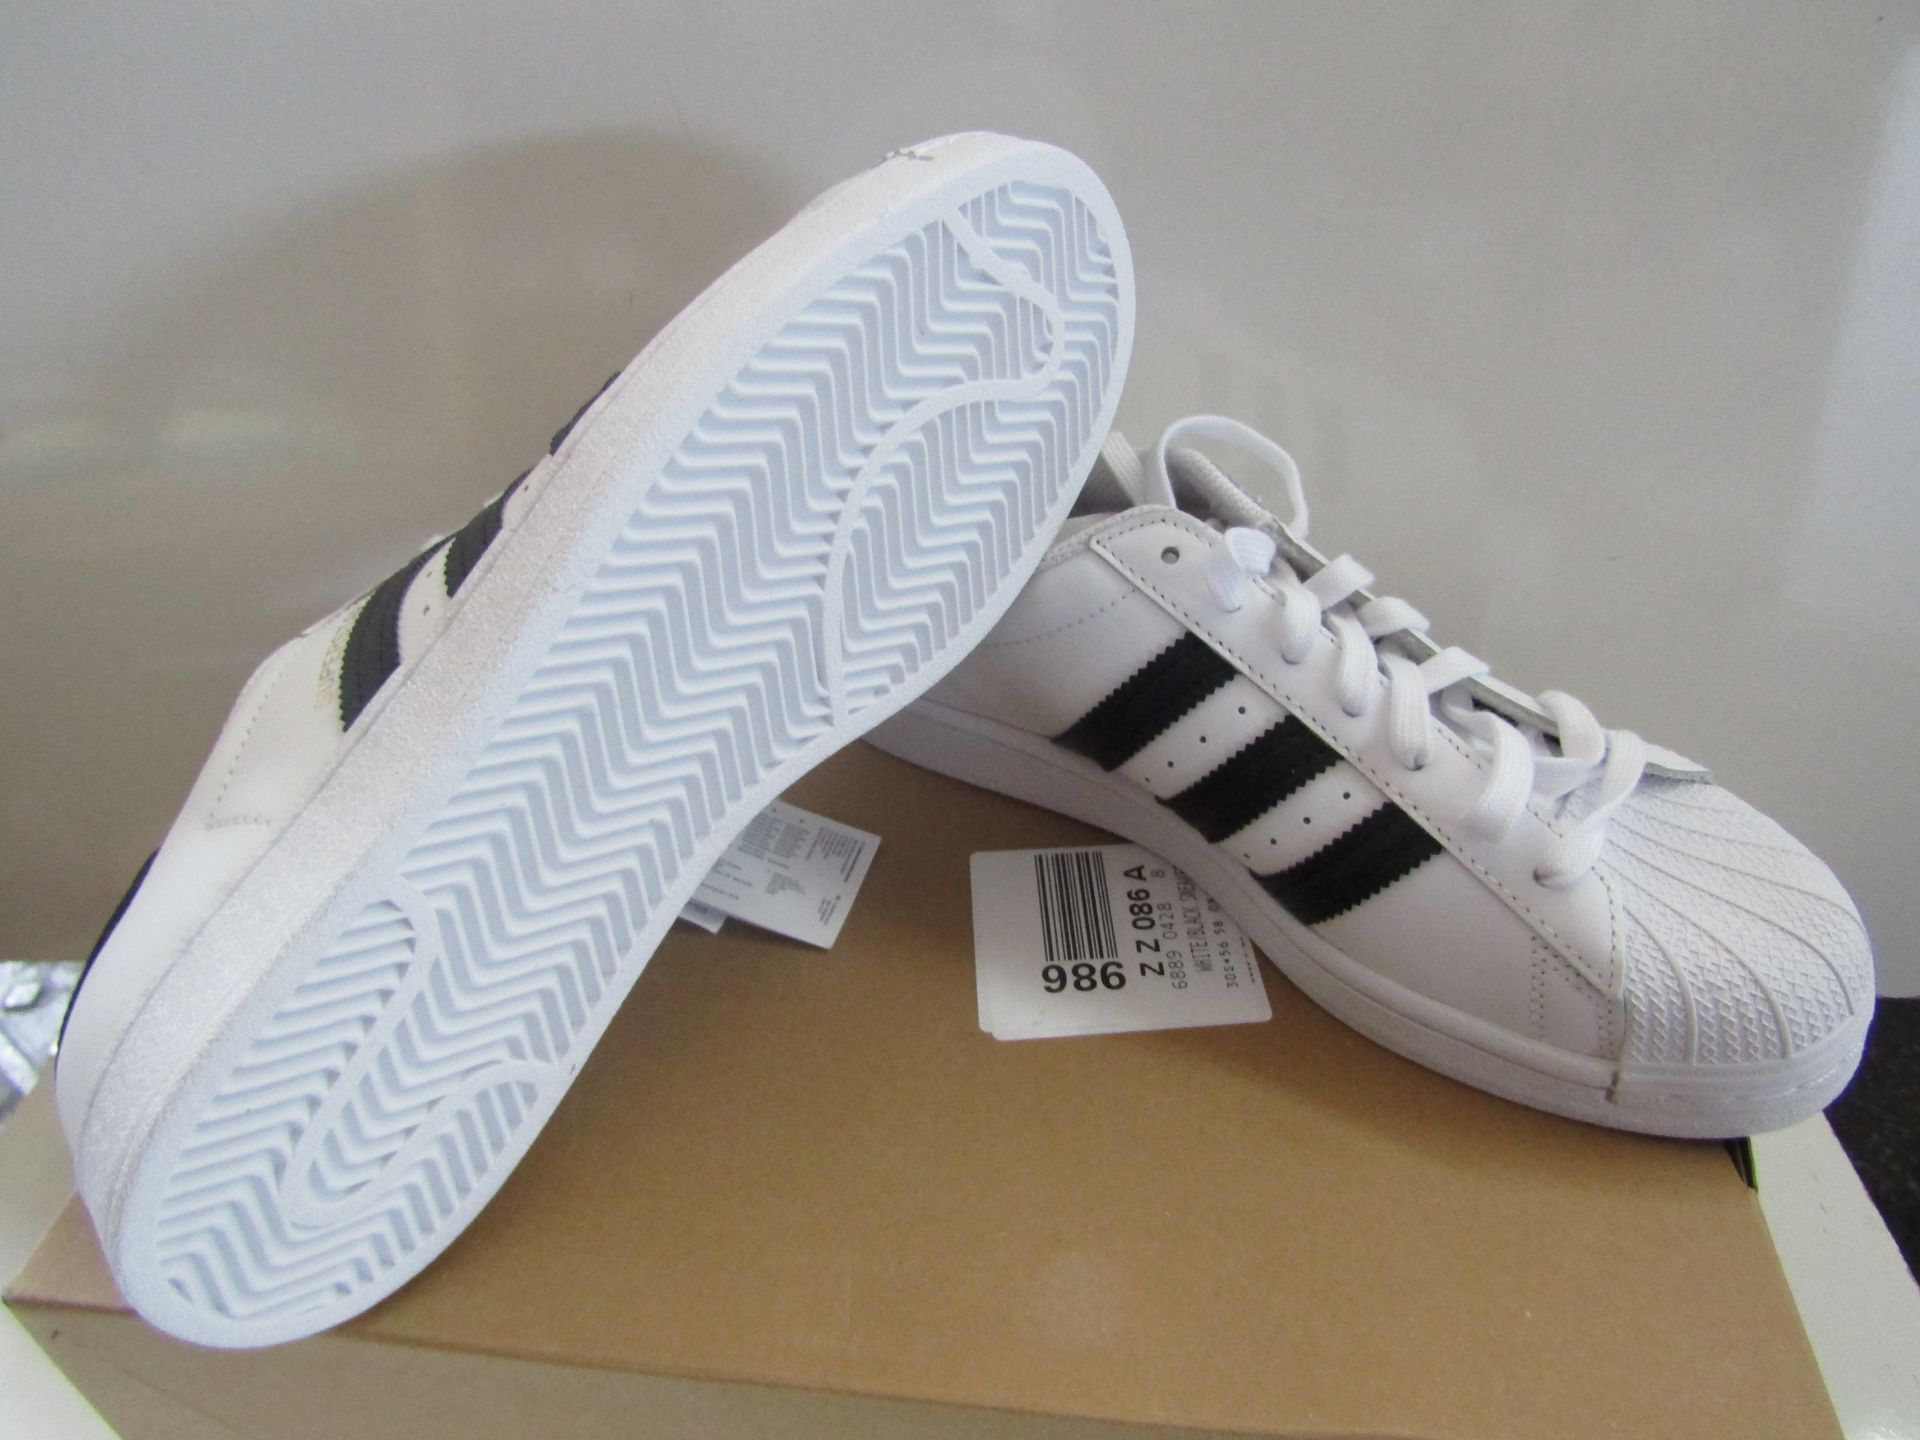 Adidas Superstar Black/White Trainers Size 8 New & Boxed - Image 2 of 3